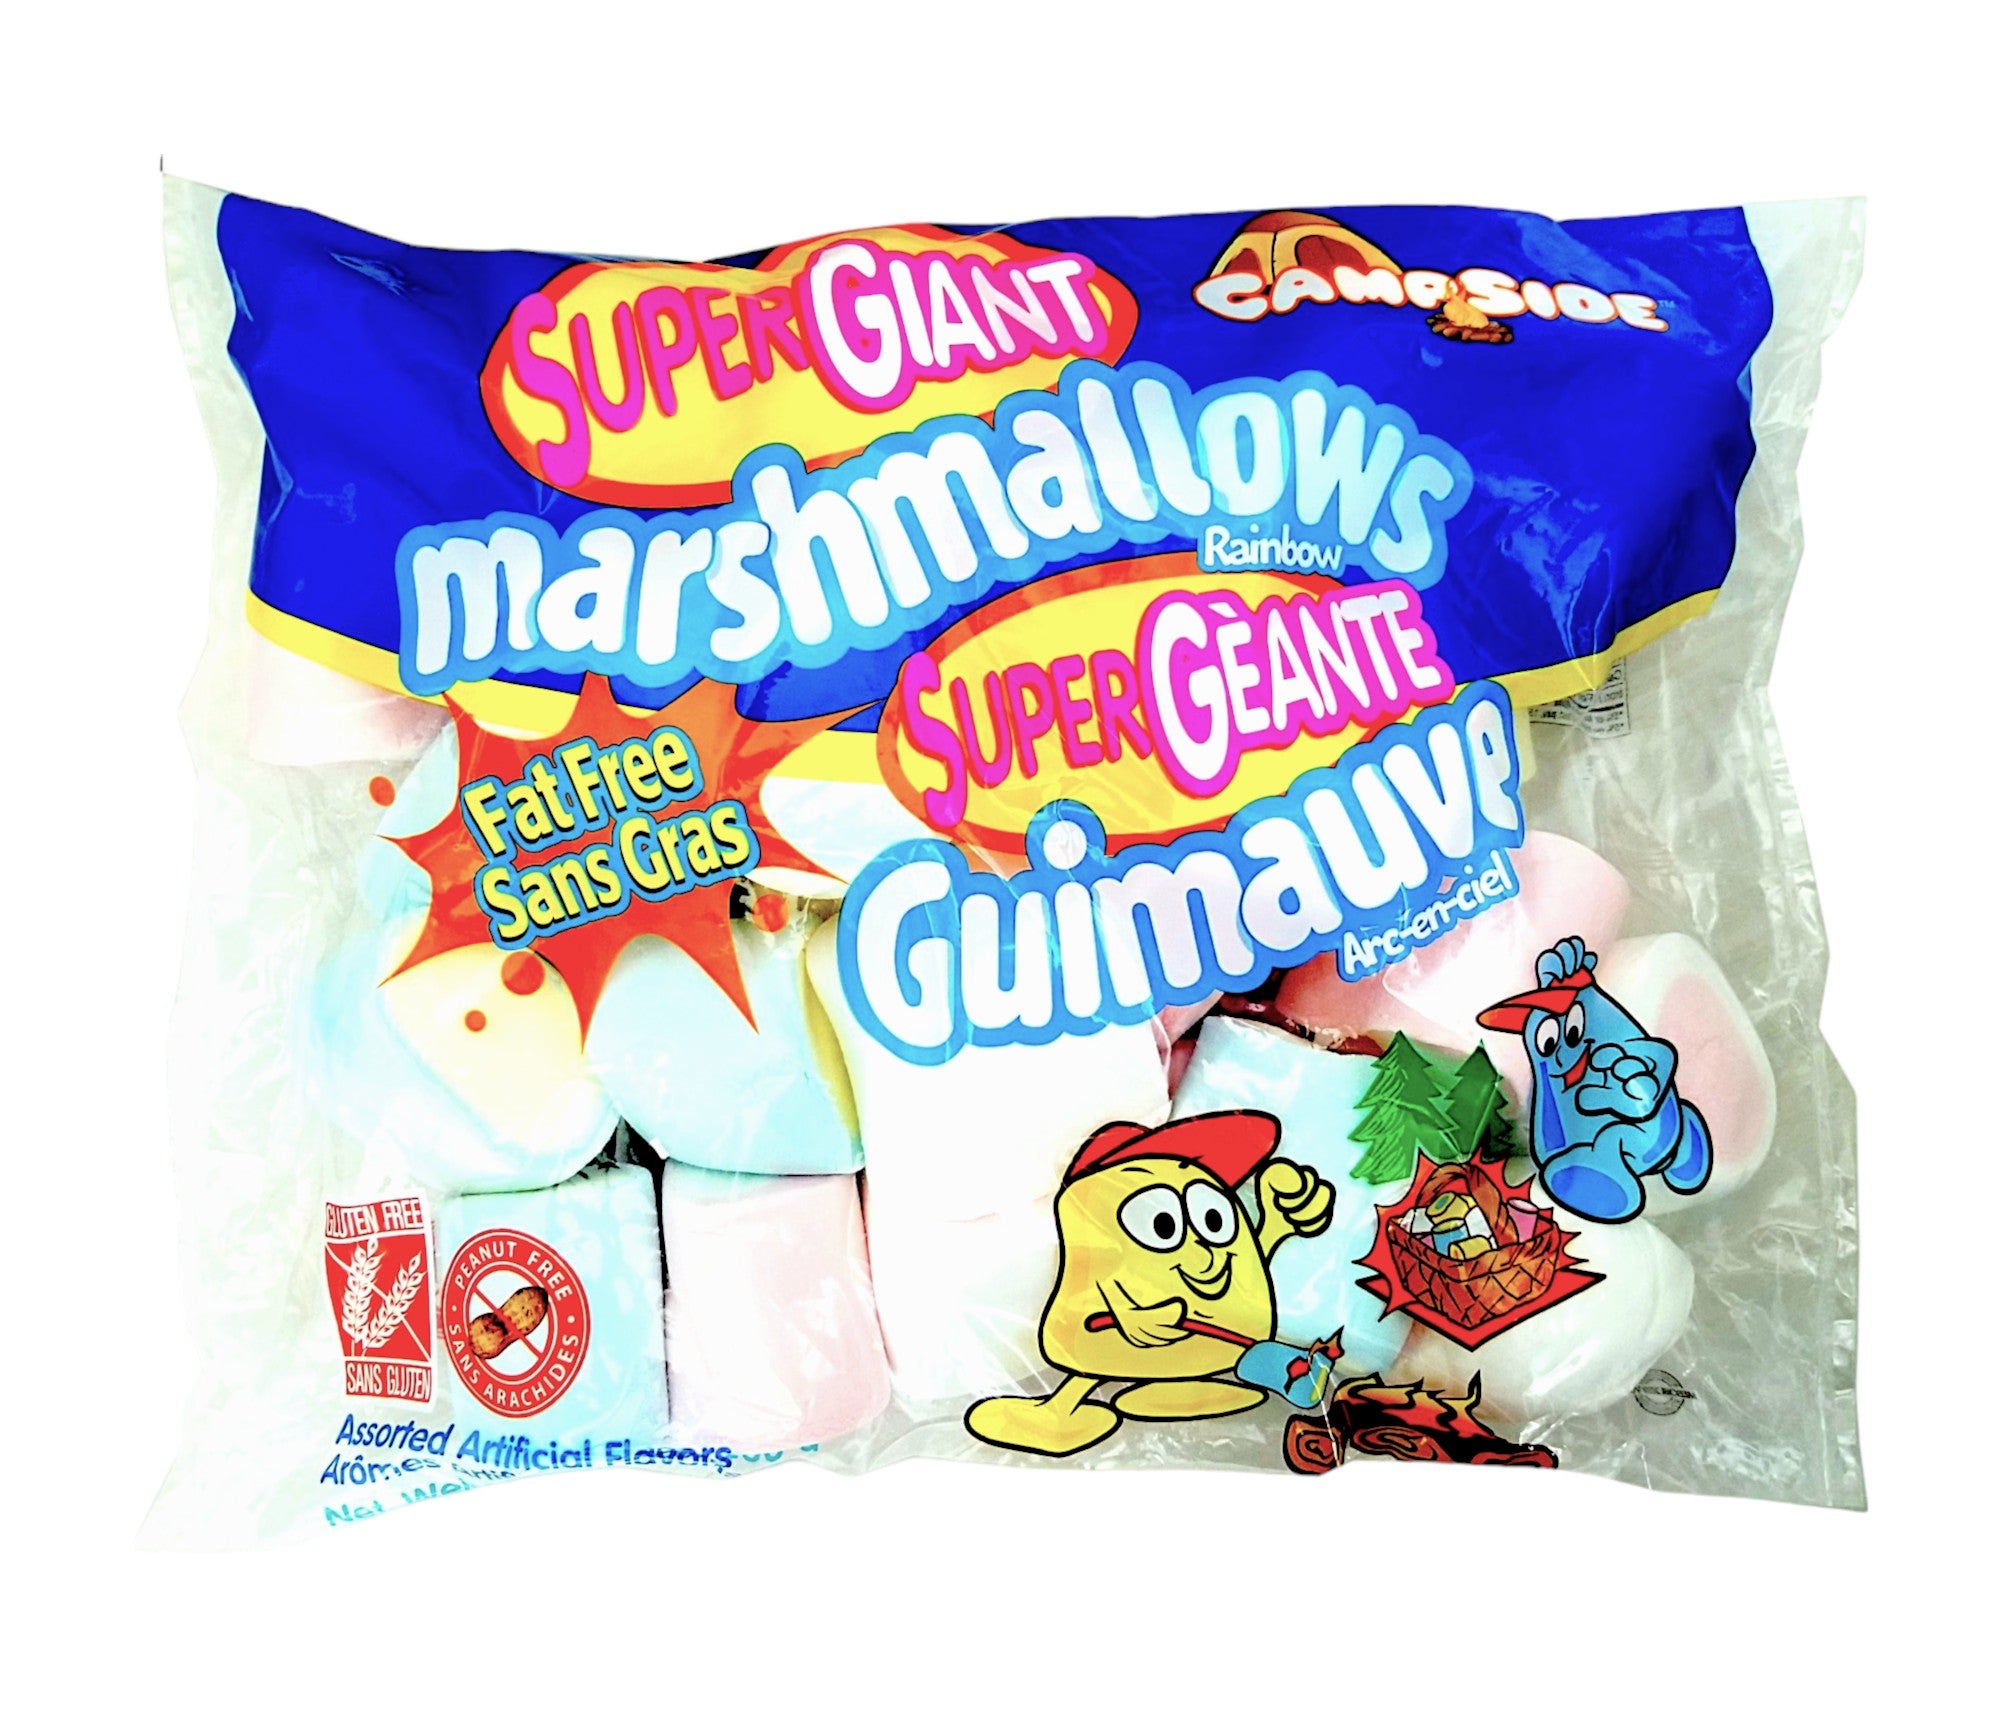 Campside Super Giant Rainbow Marshmallows, 700g,front of bag.